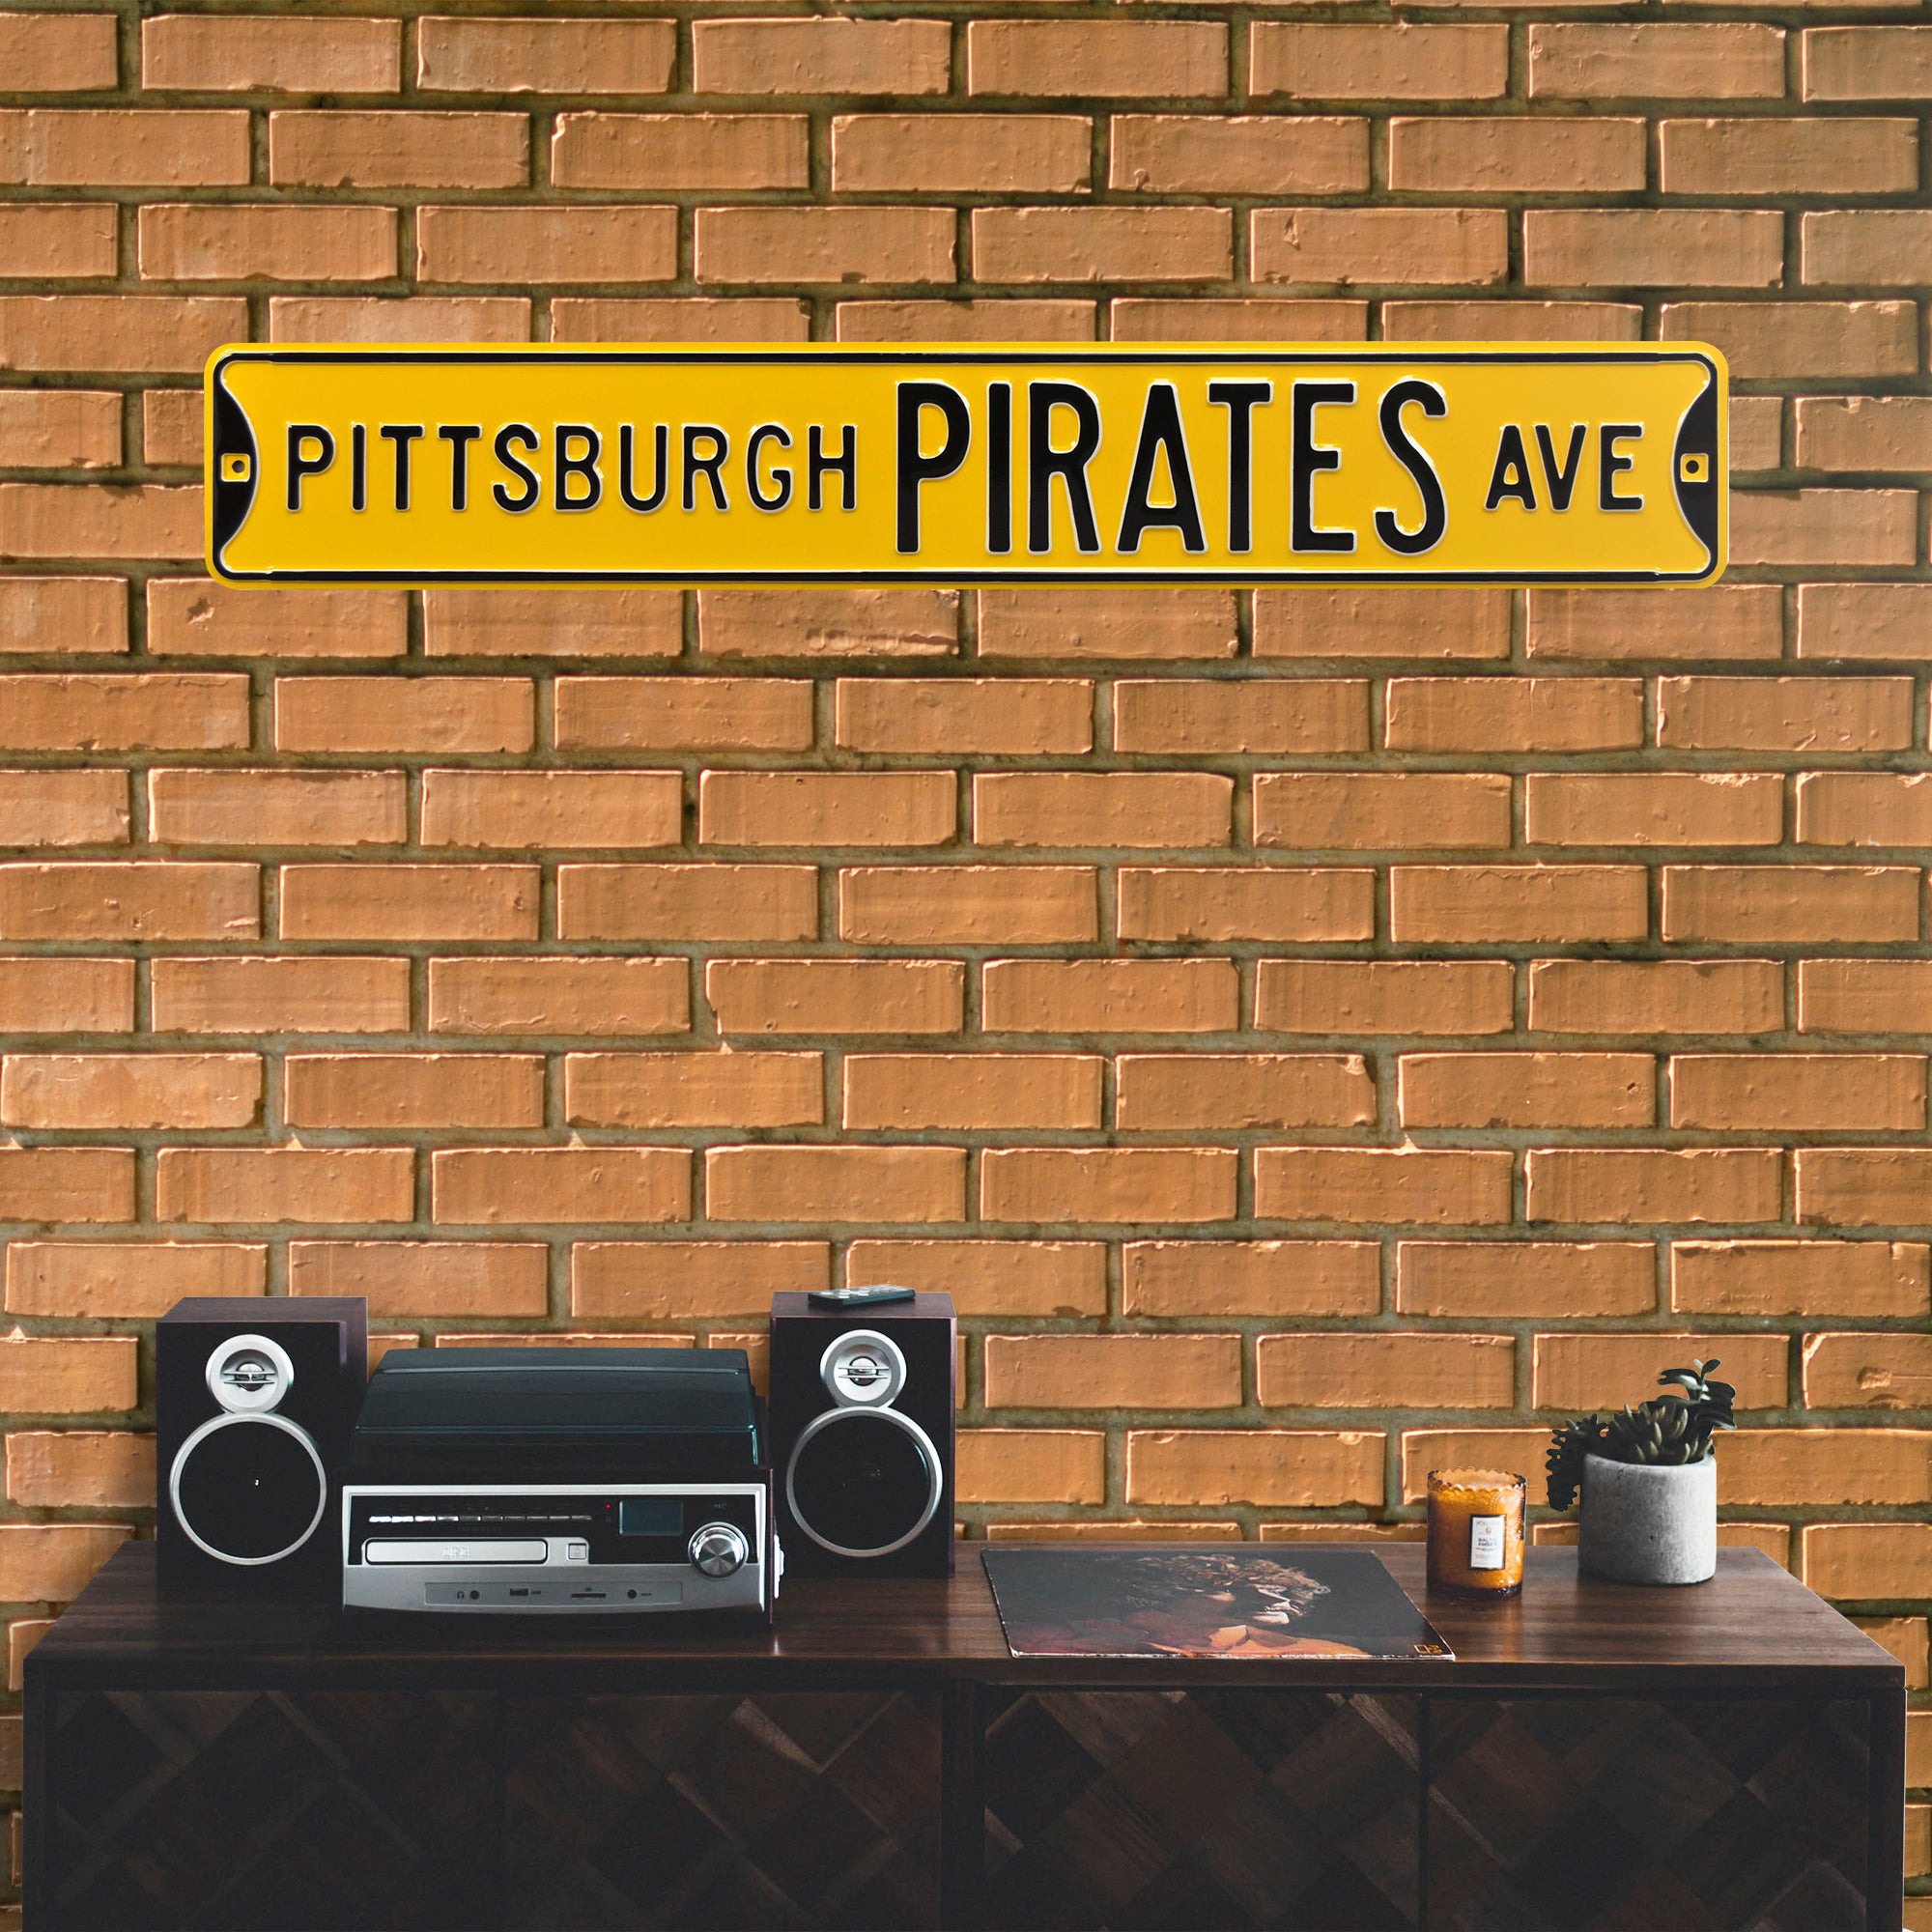 Pittsburgh Pirates Steel Street Sign-PITTSBURGH PIRATES AVE 36" W x 6" H by Fathead